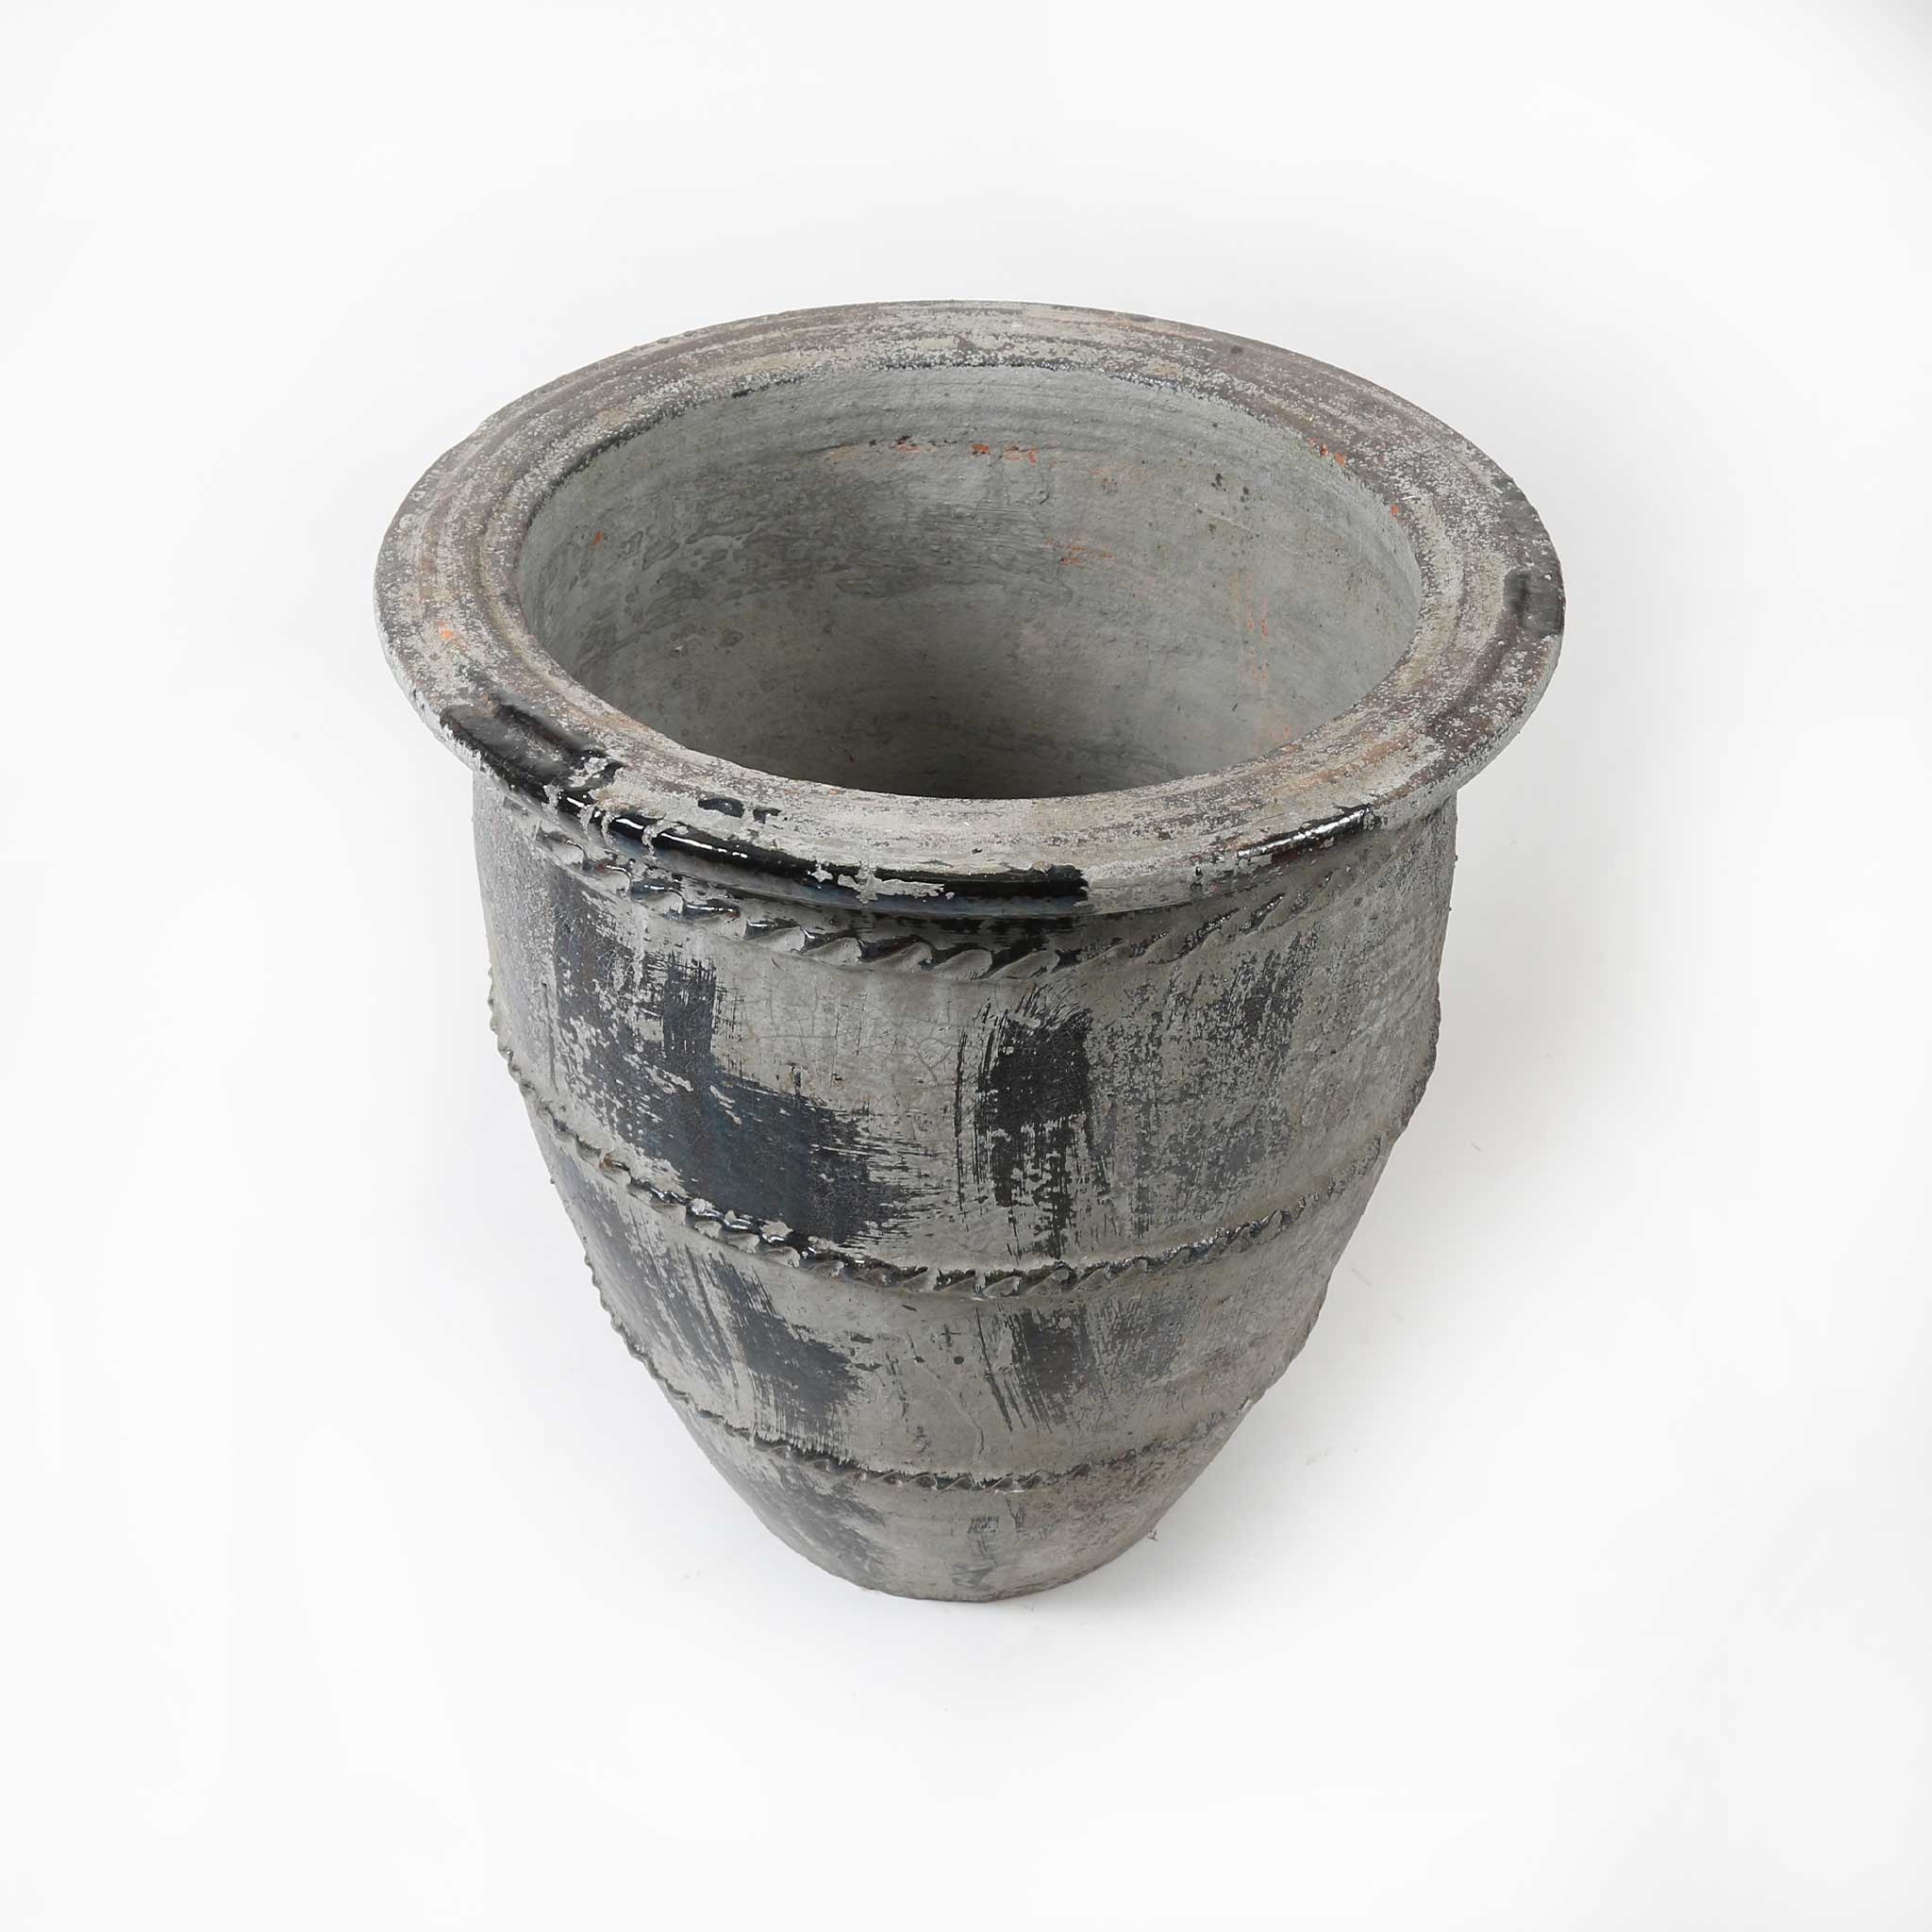 Large Clay Pot with Plait Pattern around Perimeter